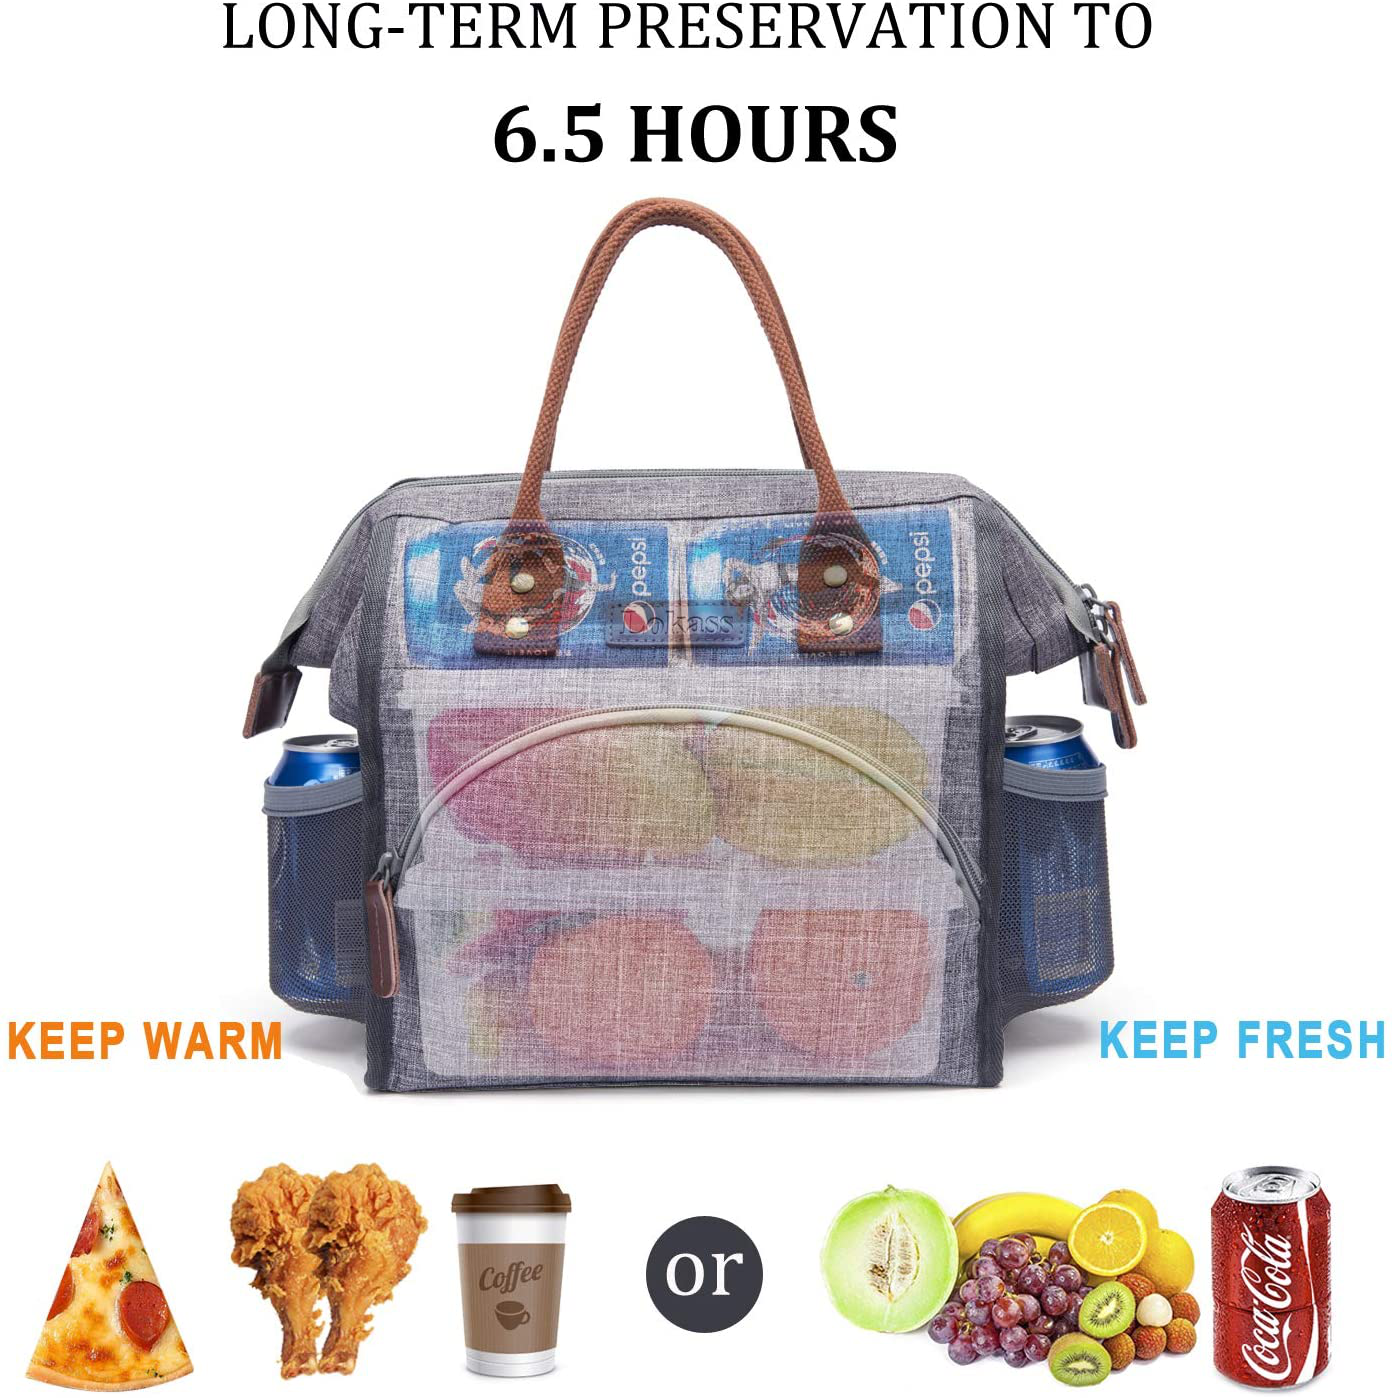 LOKASS Lunch Bag Insulated Lunch Box Wide-Open Lunch Tote Bag Large Drinks Holder Durable Nylon Snacks Organizer with Removable Shoulder Strap for Women Men Adults Work Outdoor,Sloth